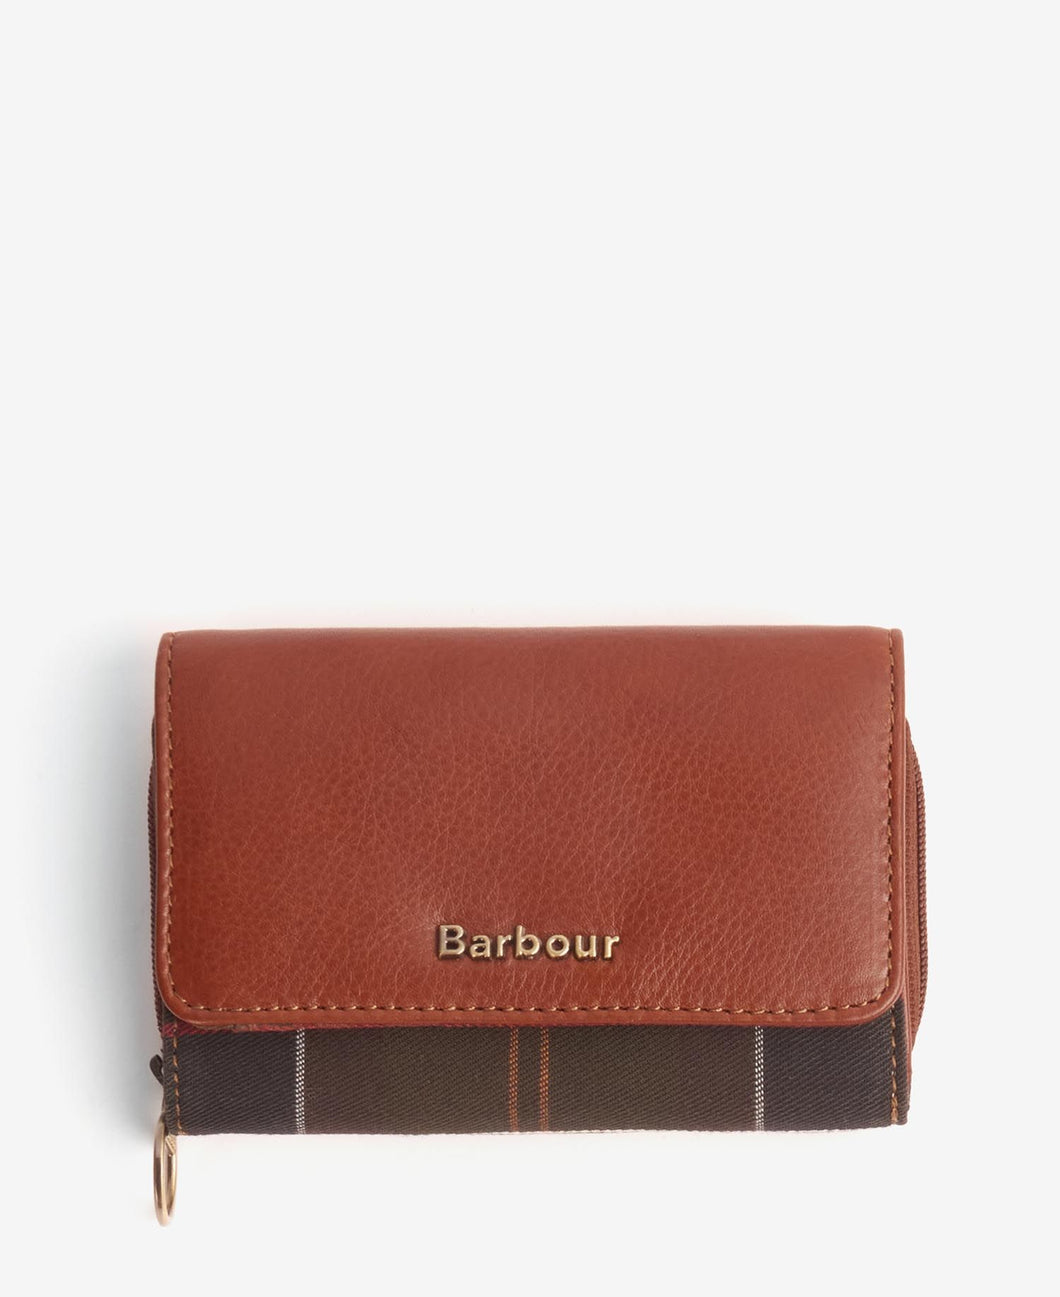 Barbour Laire Leather French Purse